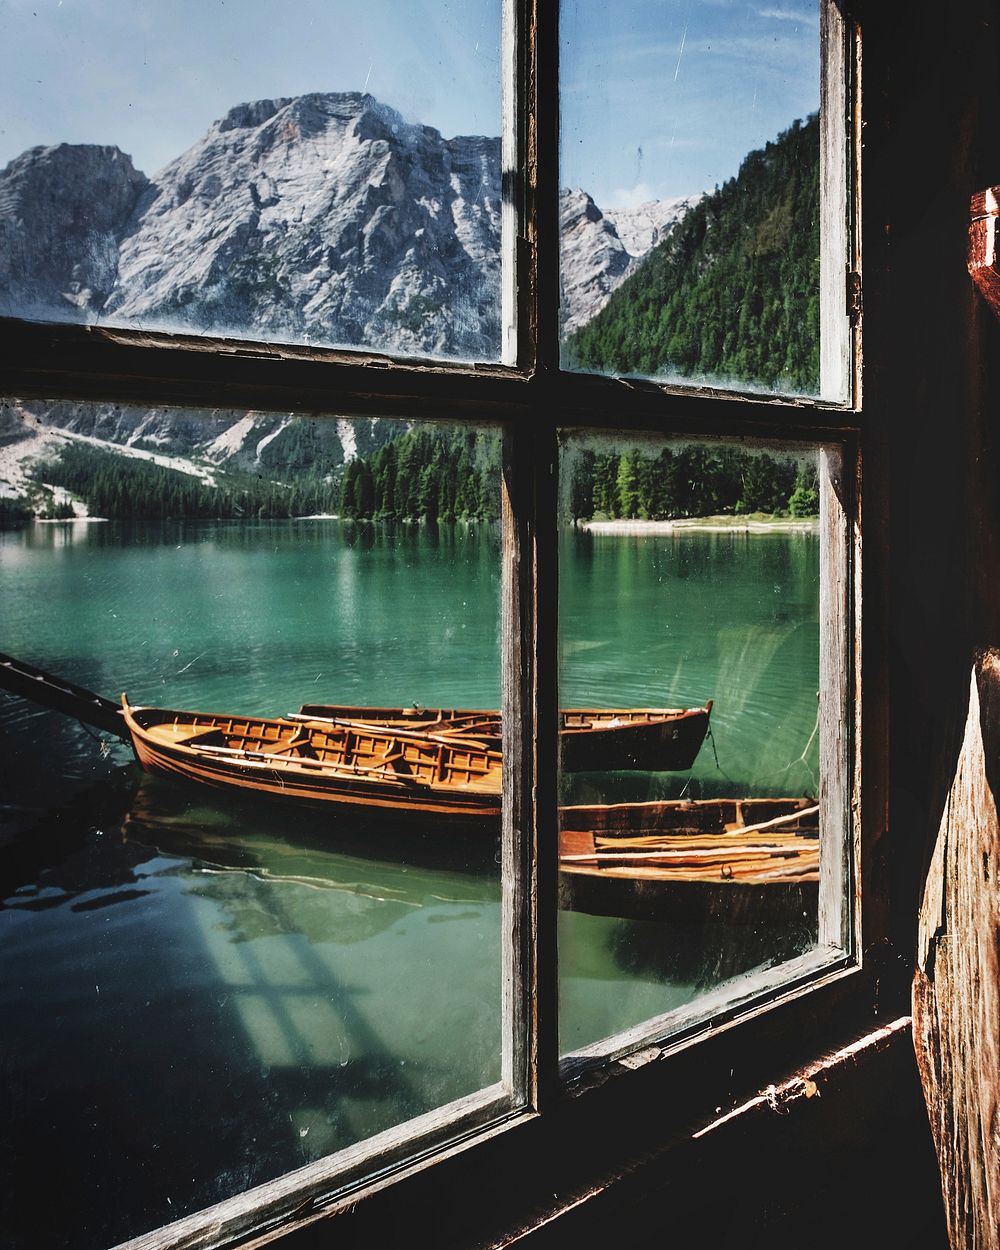 A window view looking at a pair of boats floating in the river with a mix of green and snow covered mountains.. Original…